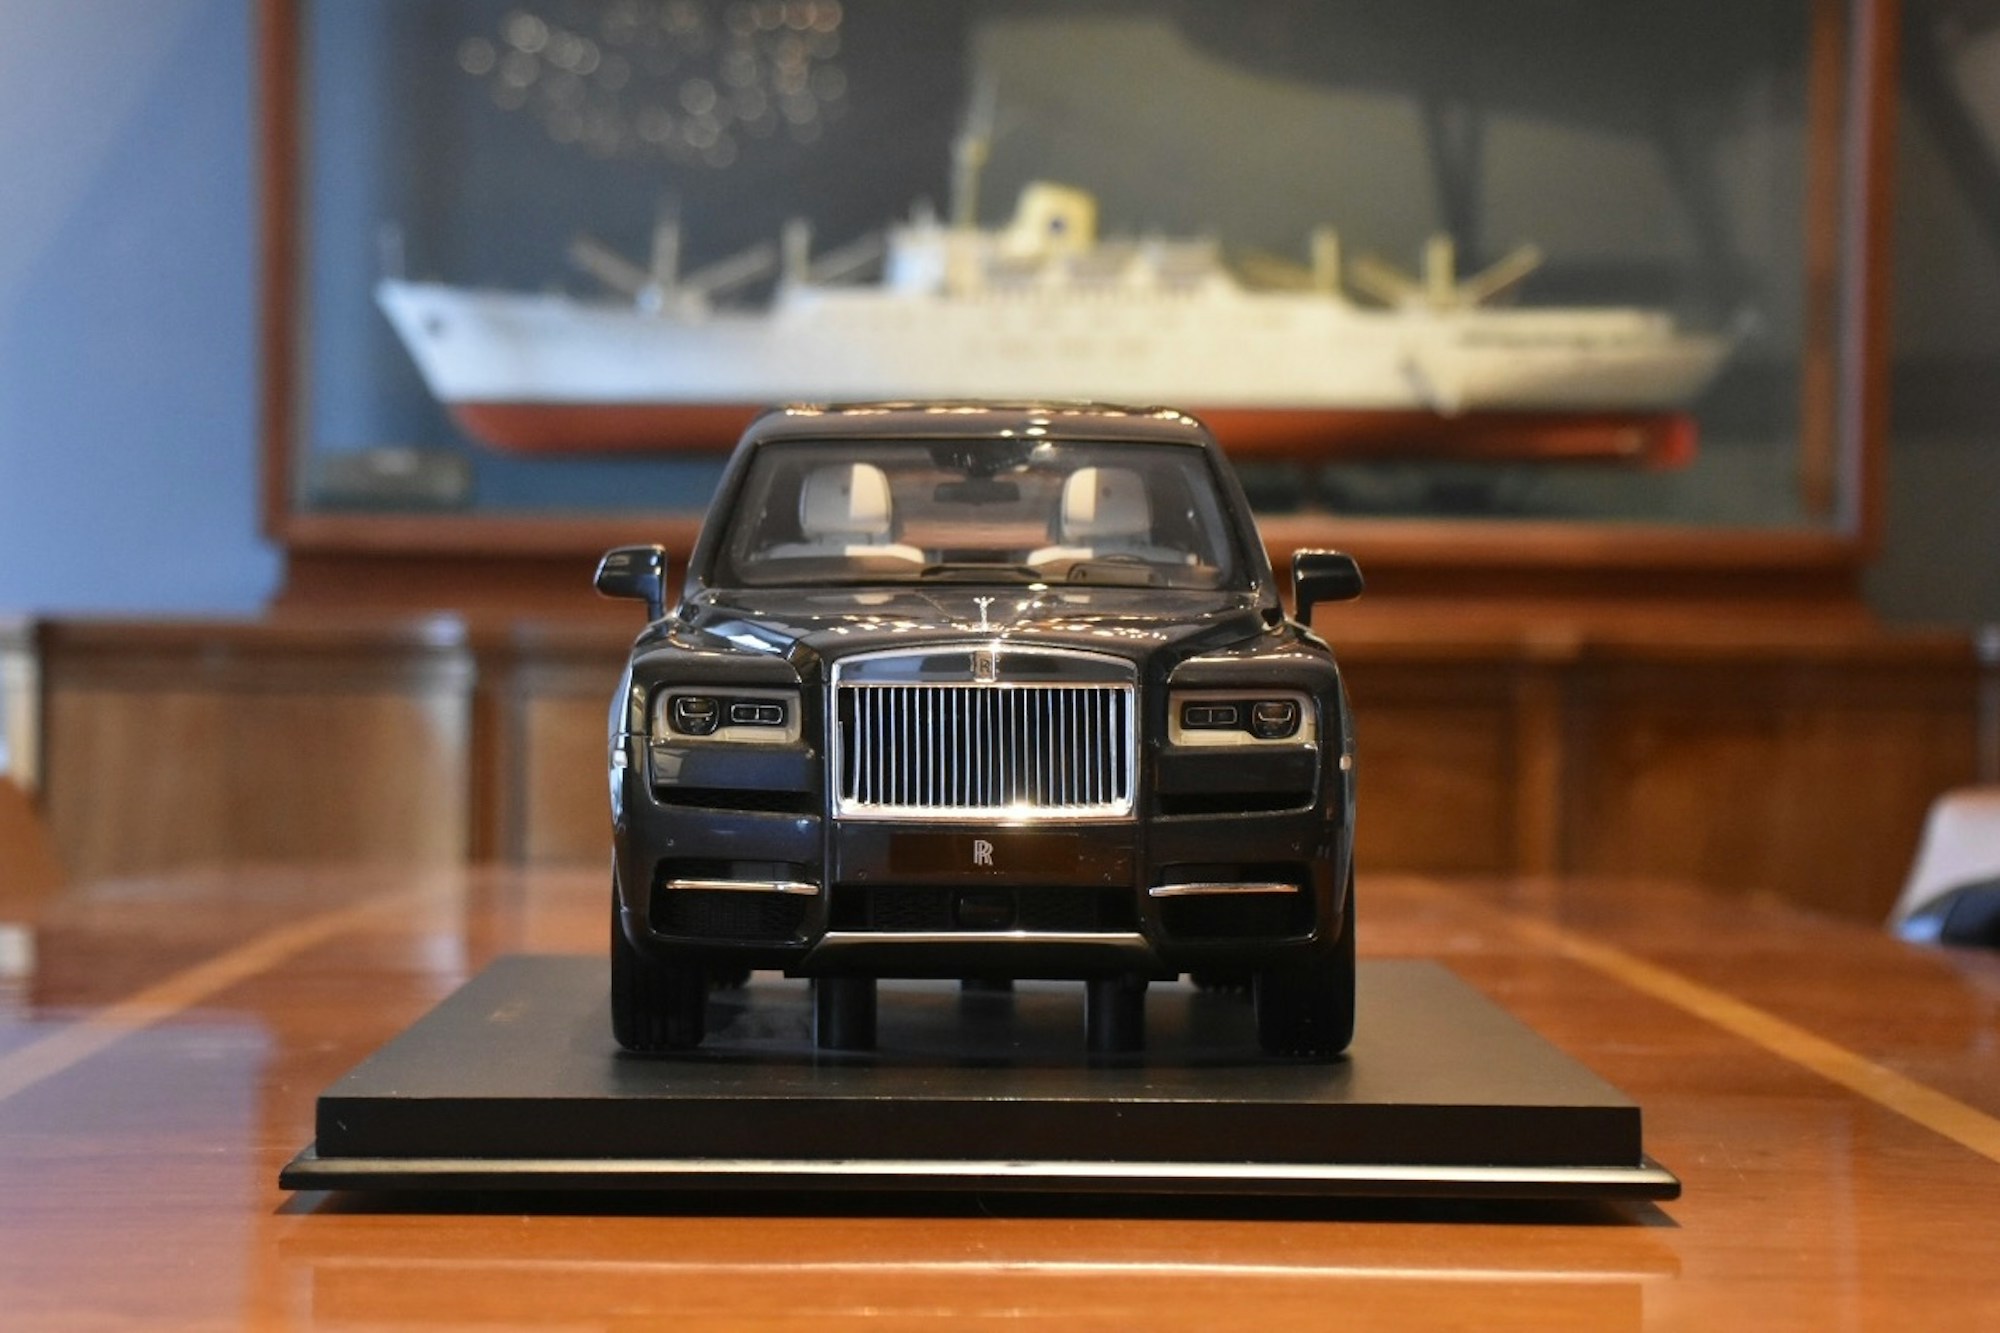 World's Most Expensive Toy Car, Rolls Royce Cullinan